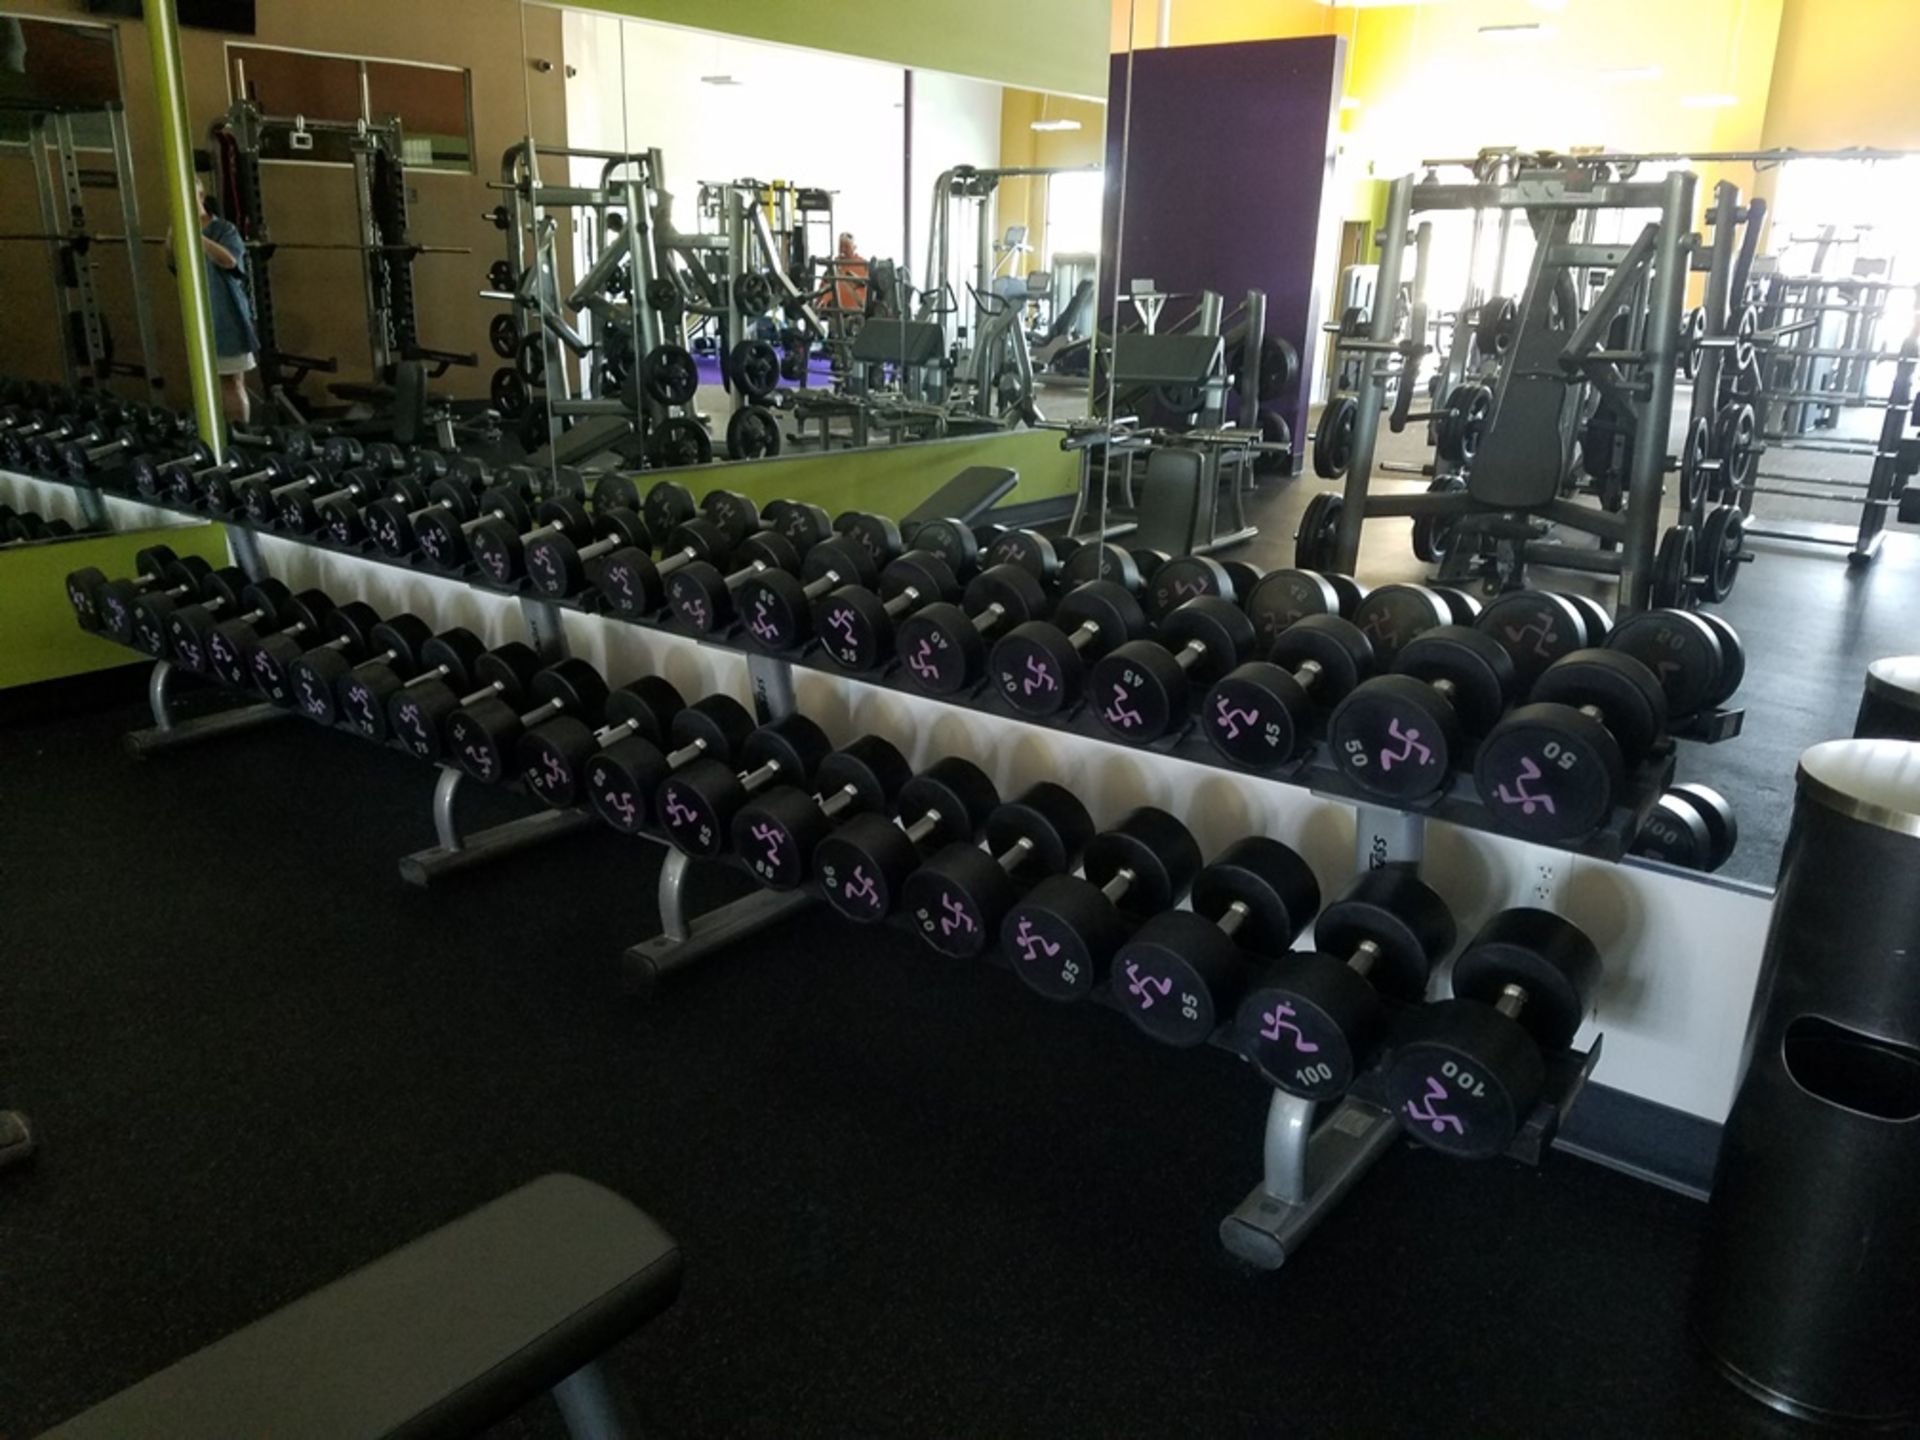 Complete Gym sold as one unit. 10,000 dollar minimum opening bid. - Image 20 of 91